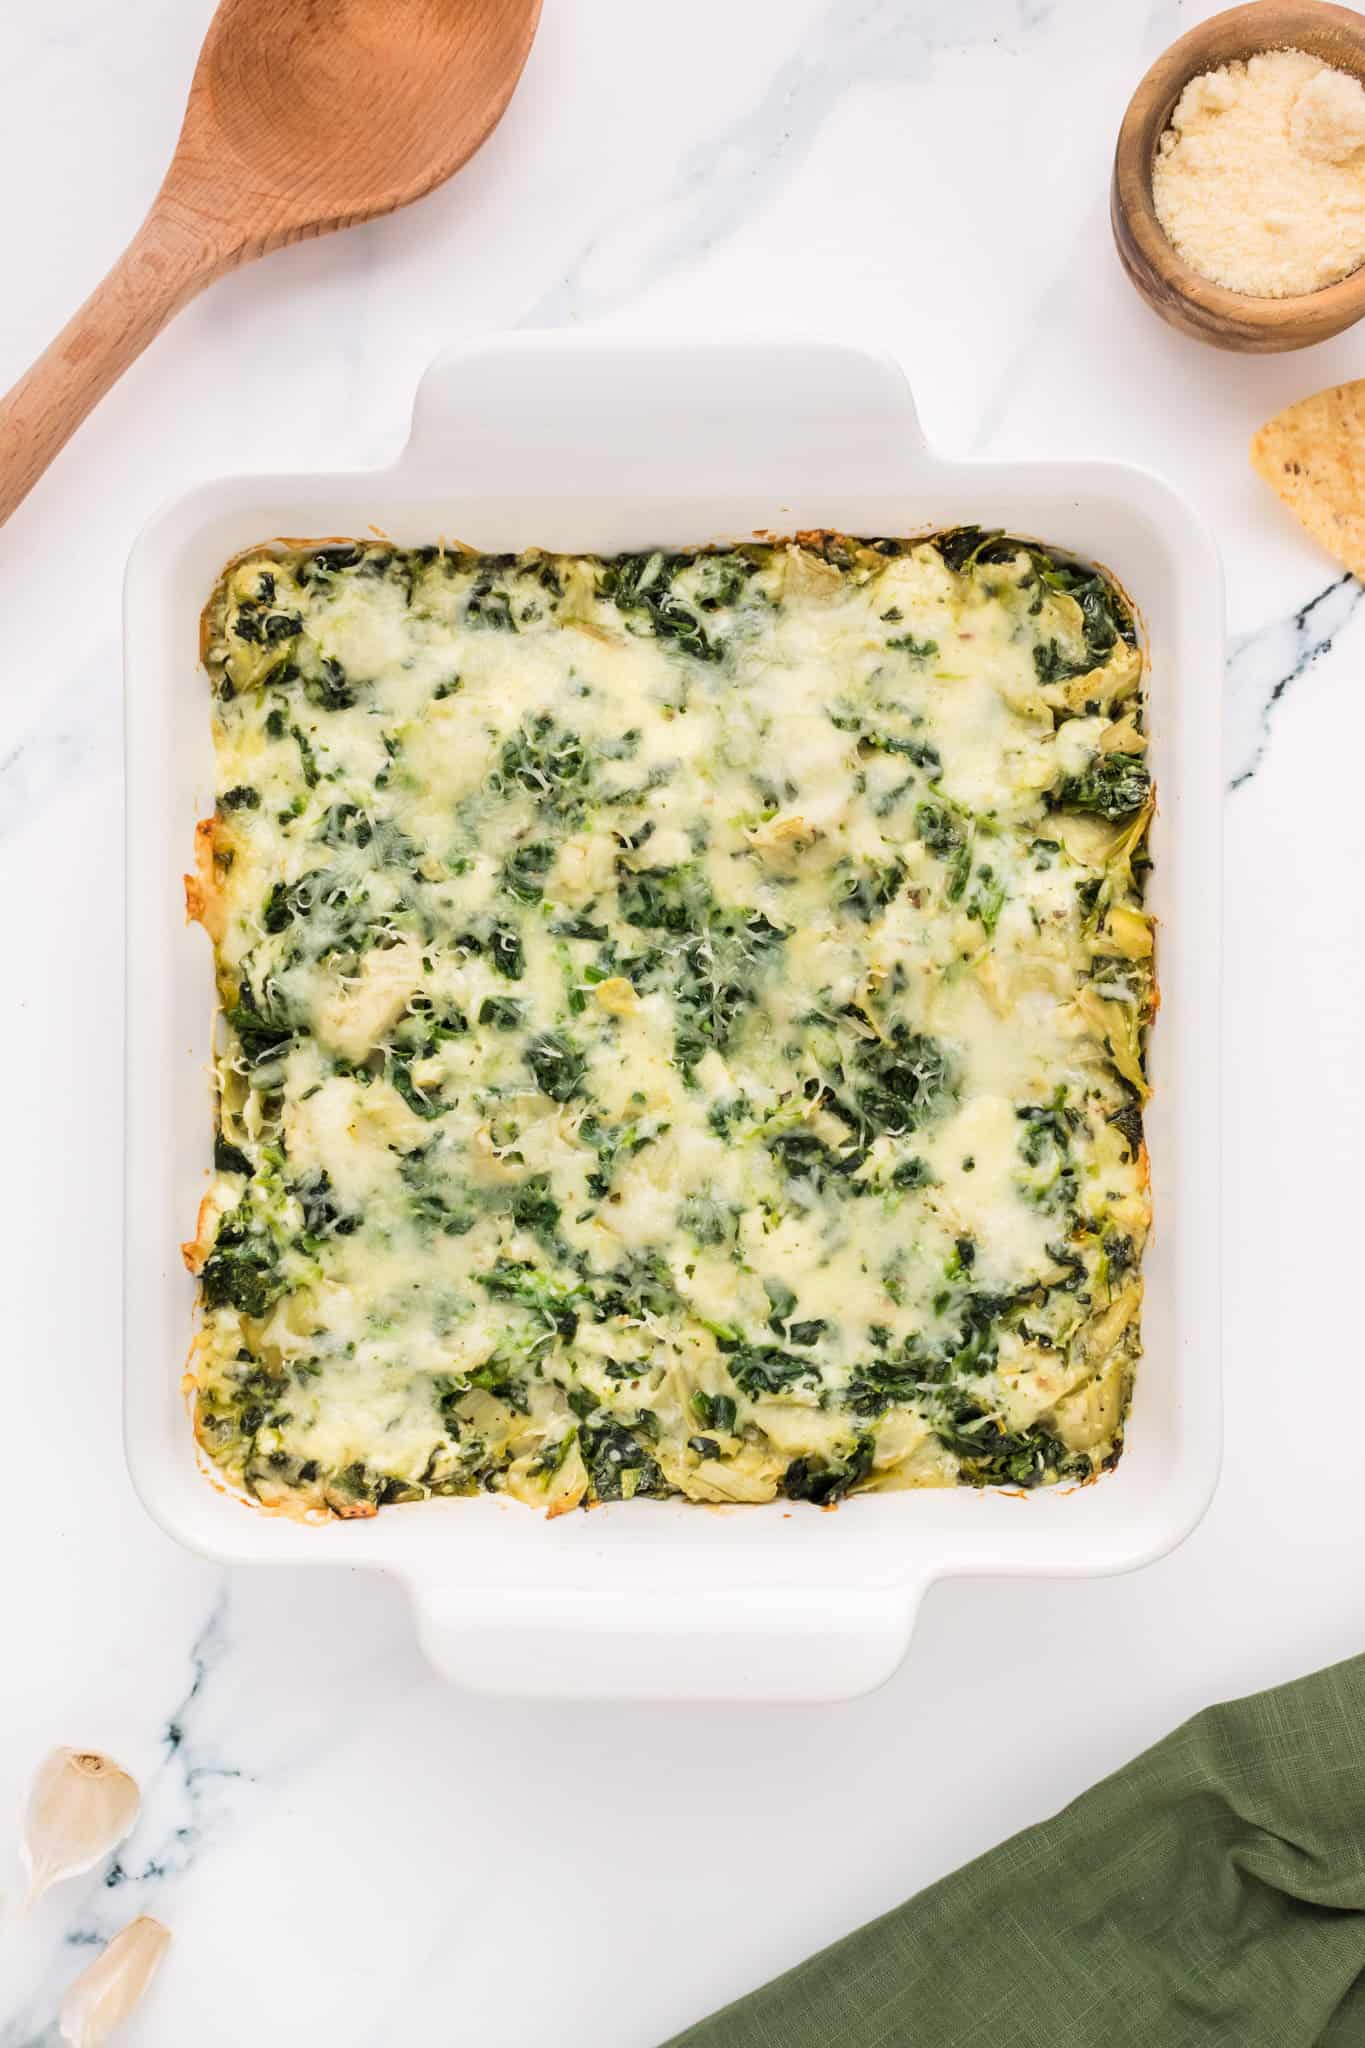 Spinach Artichoke Dip is a creamy baked dip recipe loaded with chopped artichoke hearts, spinach, cream cheese, parmesan and mozzarella.